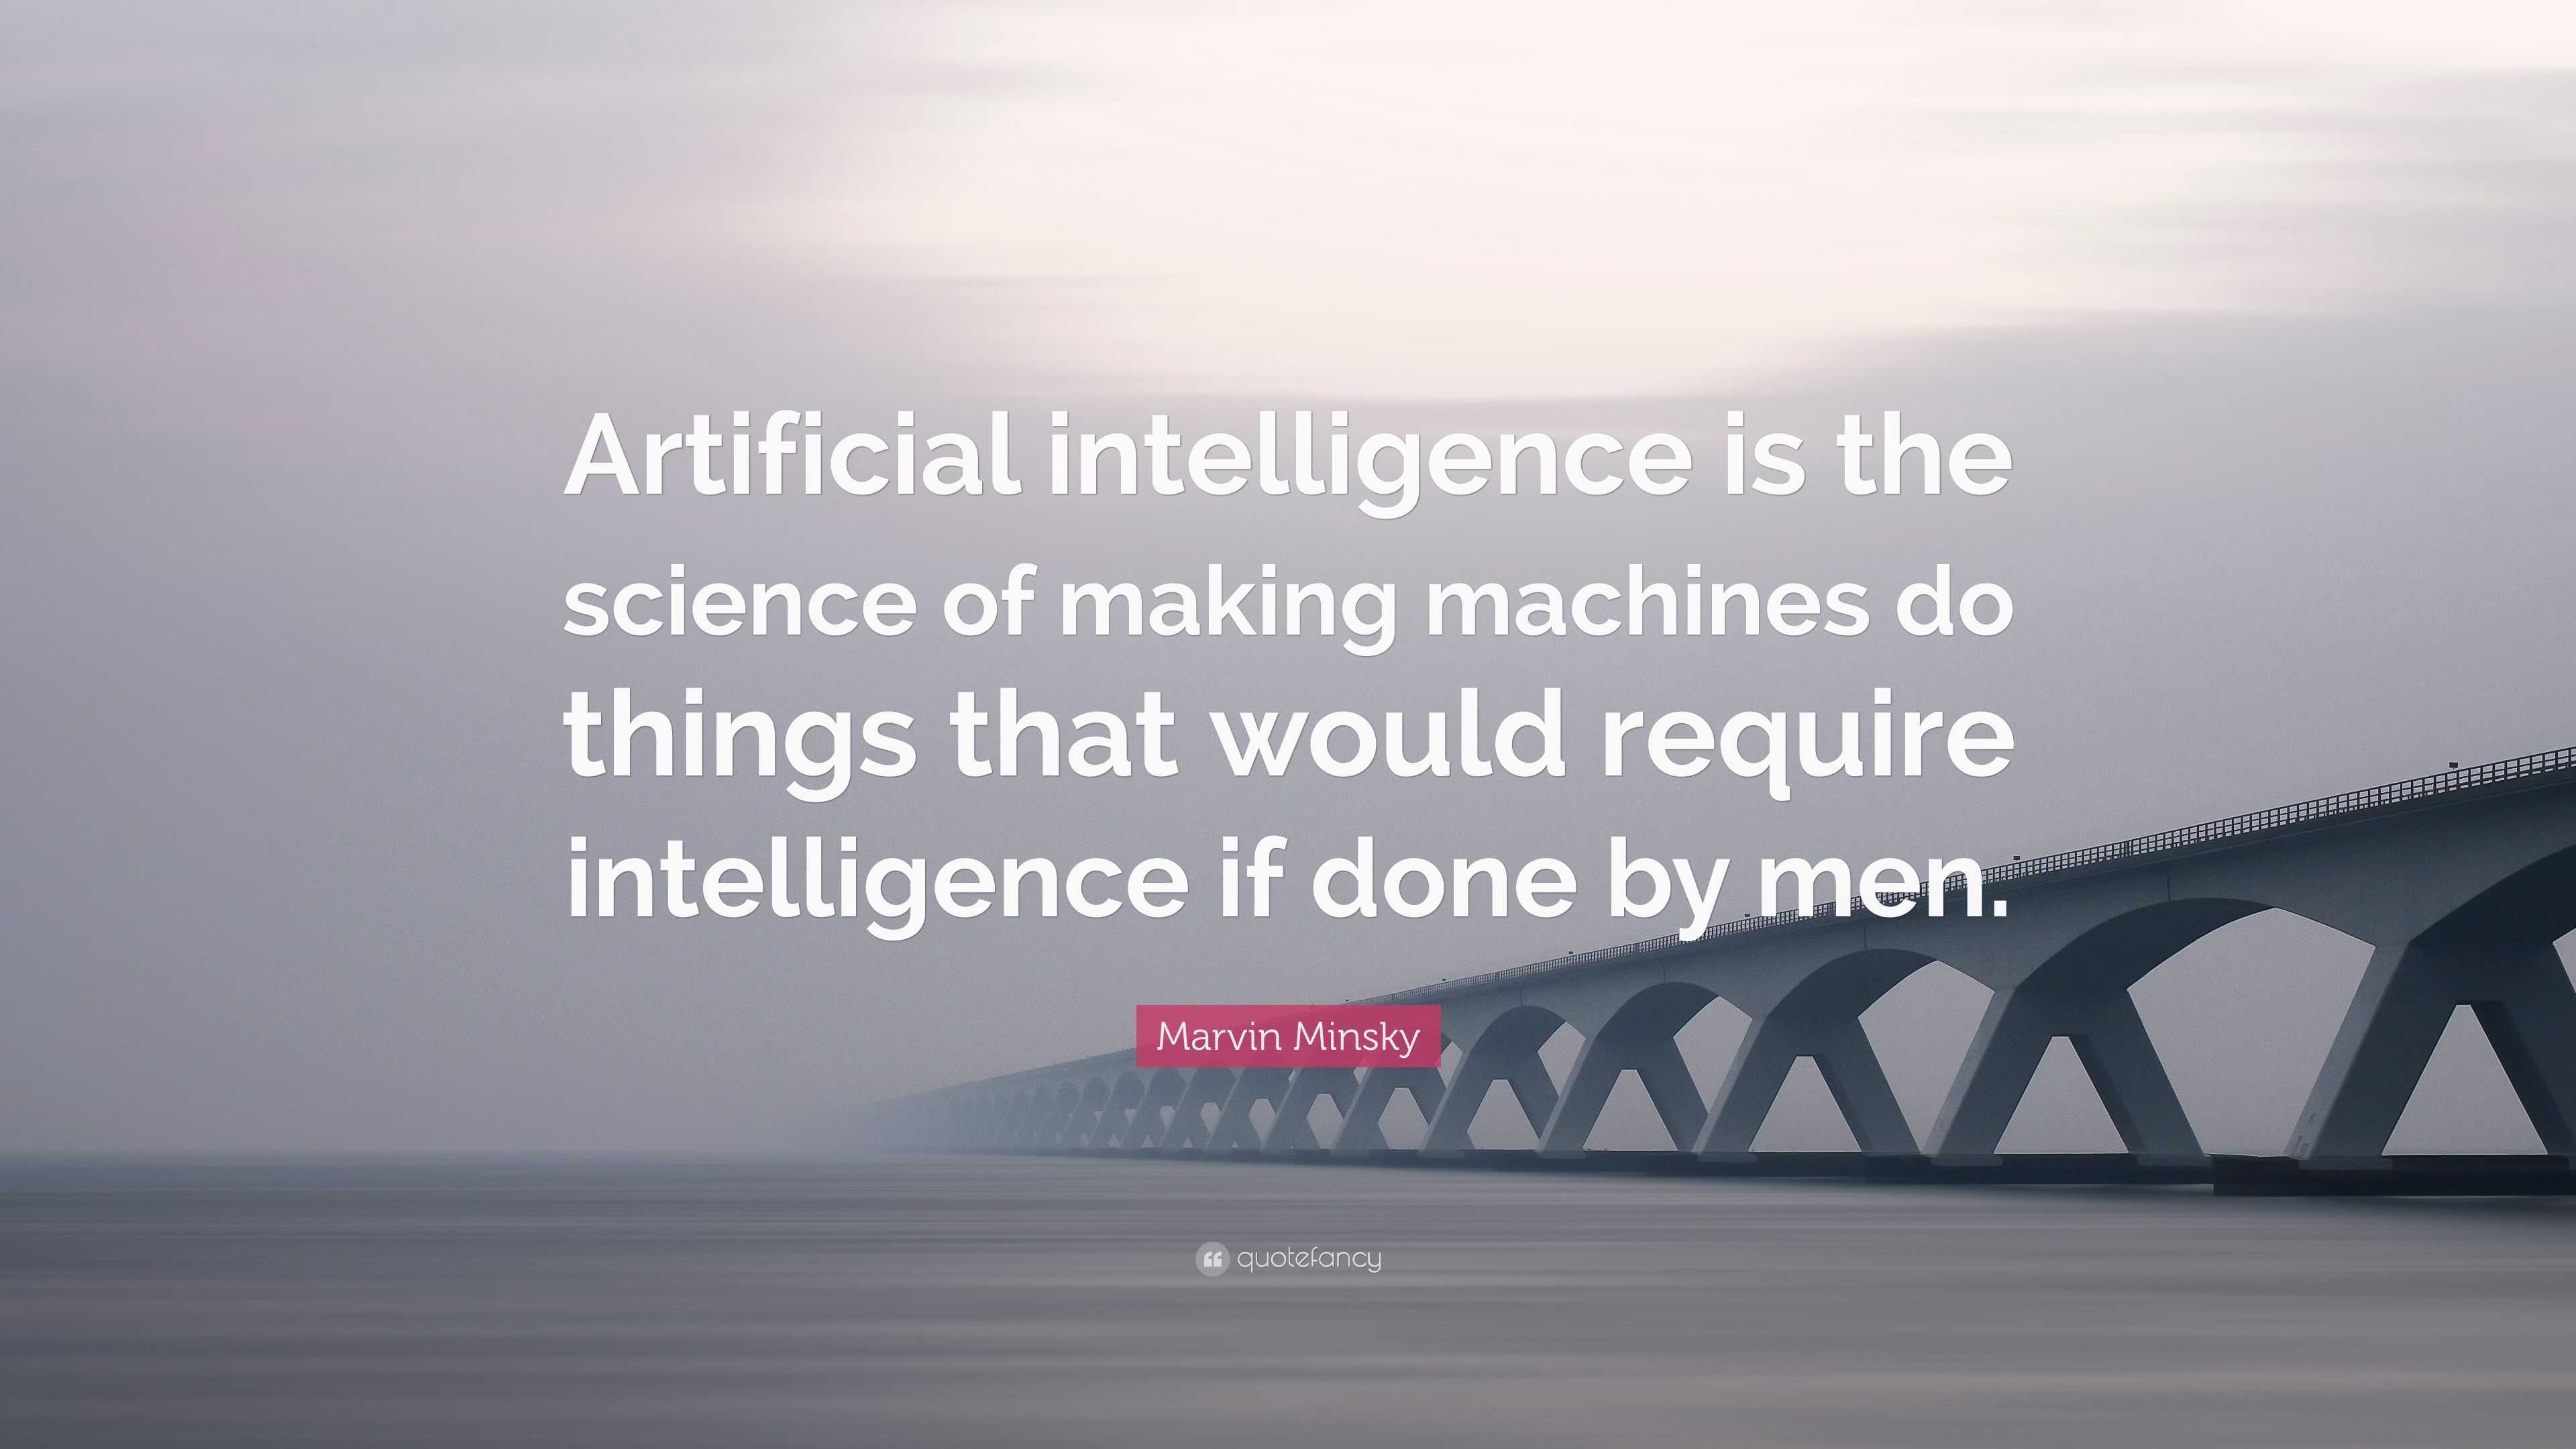 Marvin Minsky Quote: “Artificial intelligence is the science of making